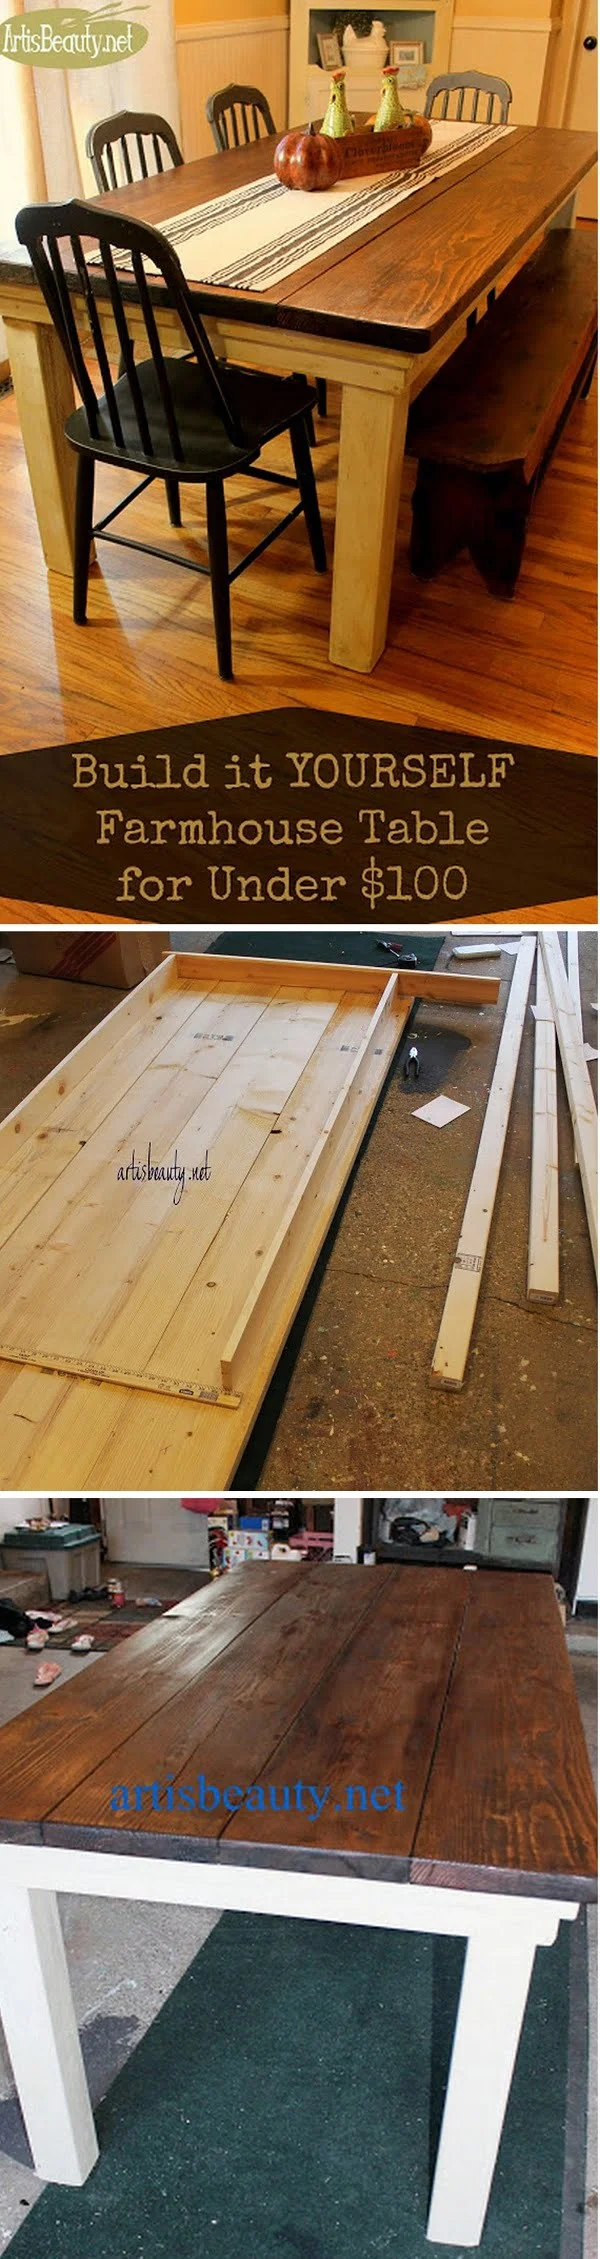 Check out the tutorial how to build a DIY farmhouse dining table for under $100 